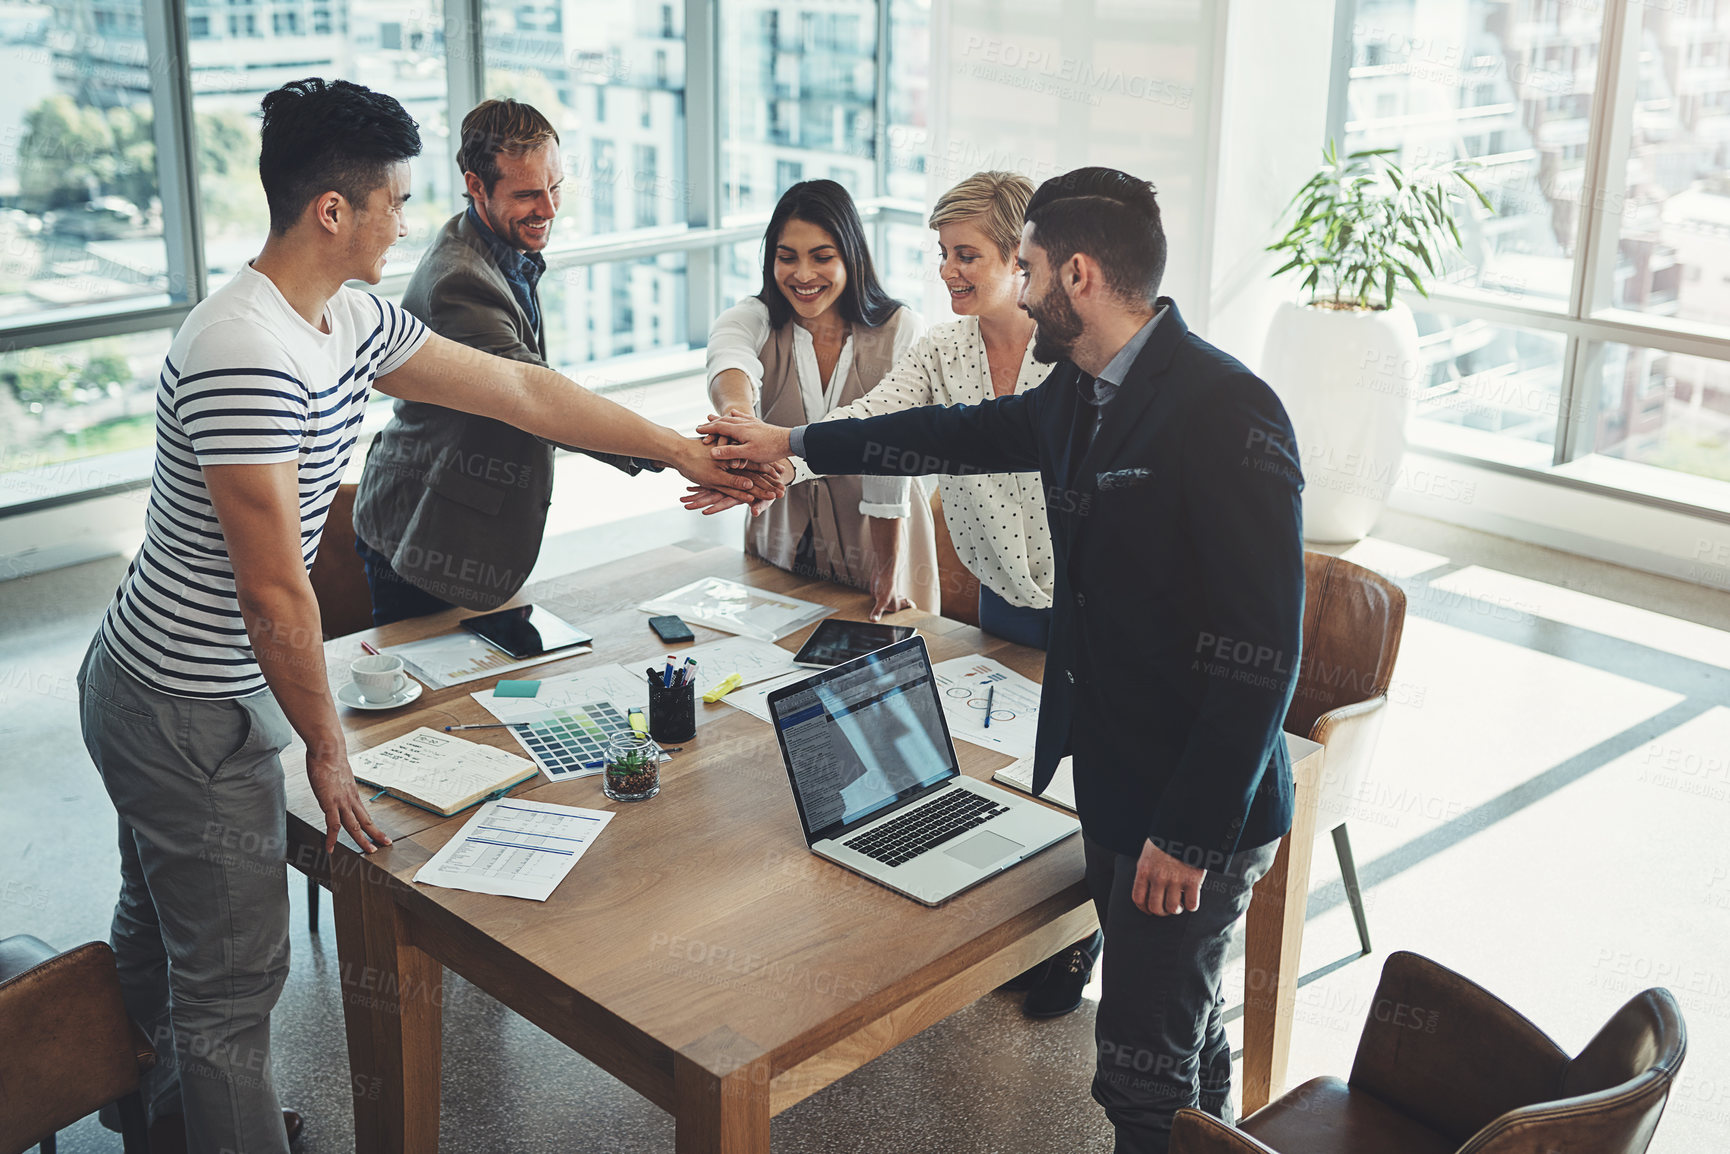 Buy stock photo Shot of a diverse group of businesspeople joining their hands in a huddle in an office